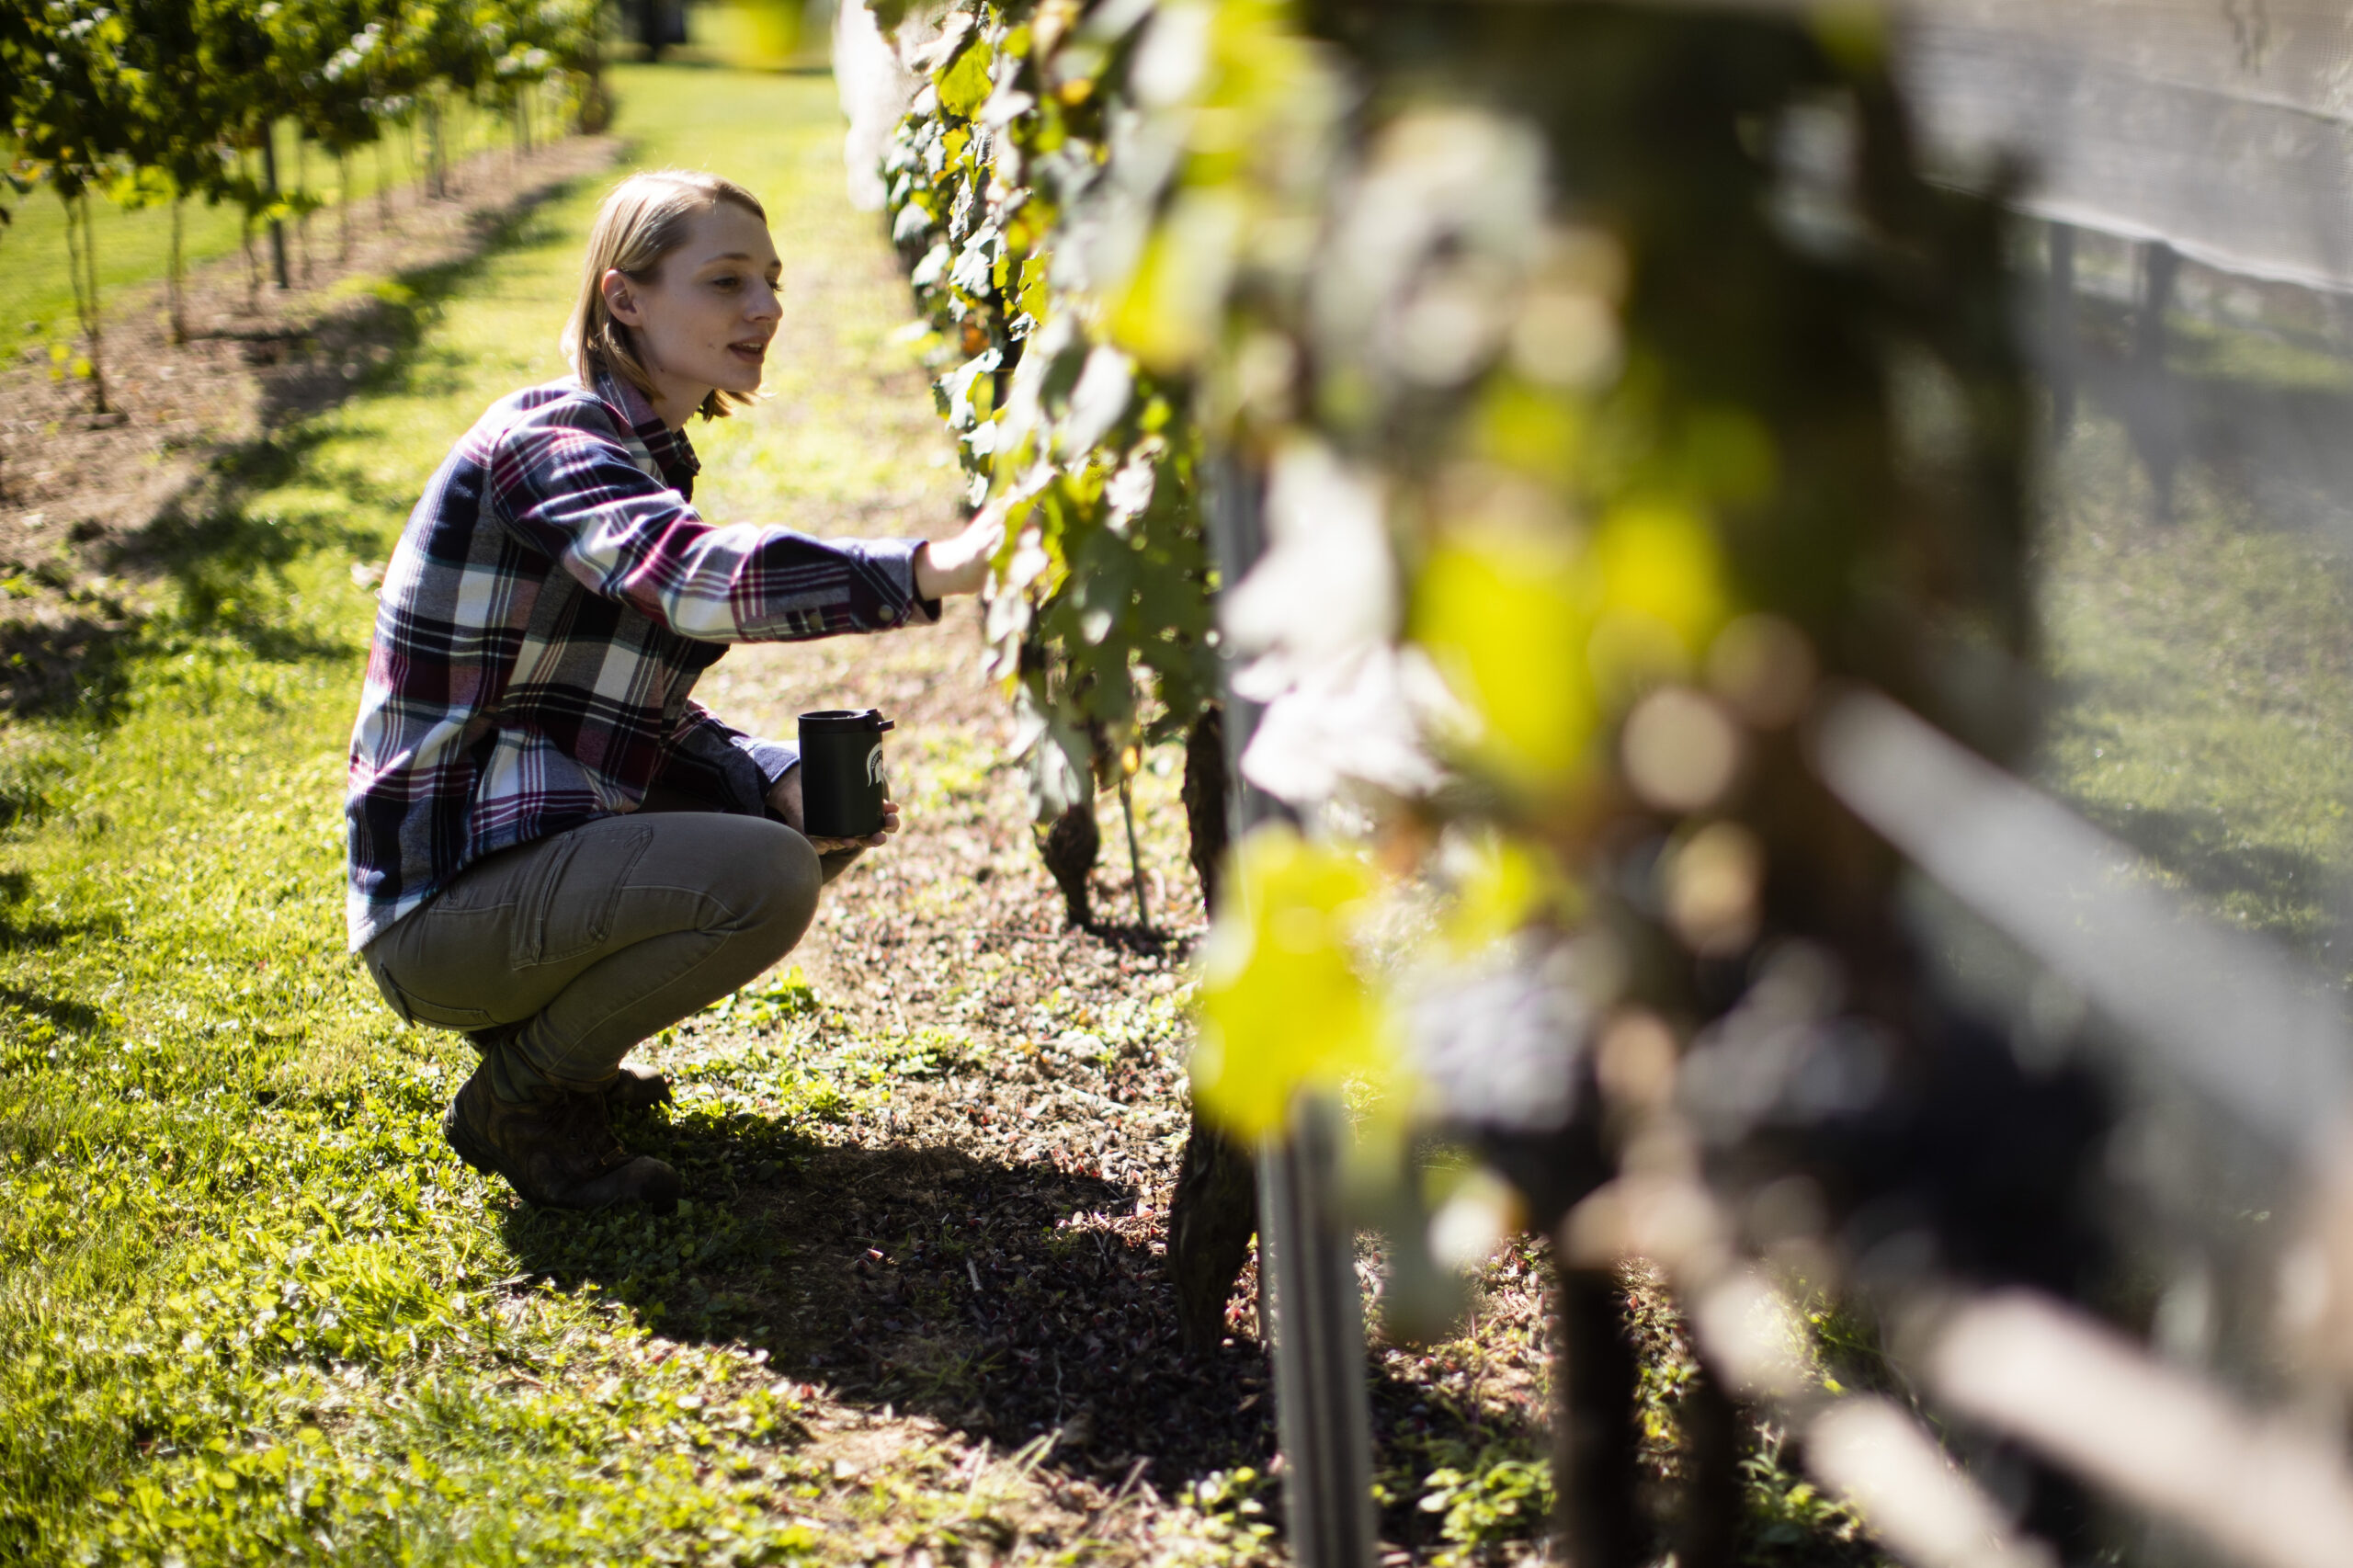 A woman attends to a grape vine